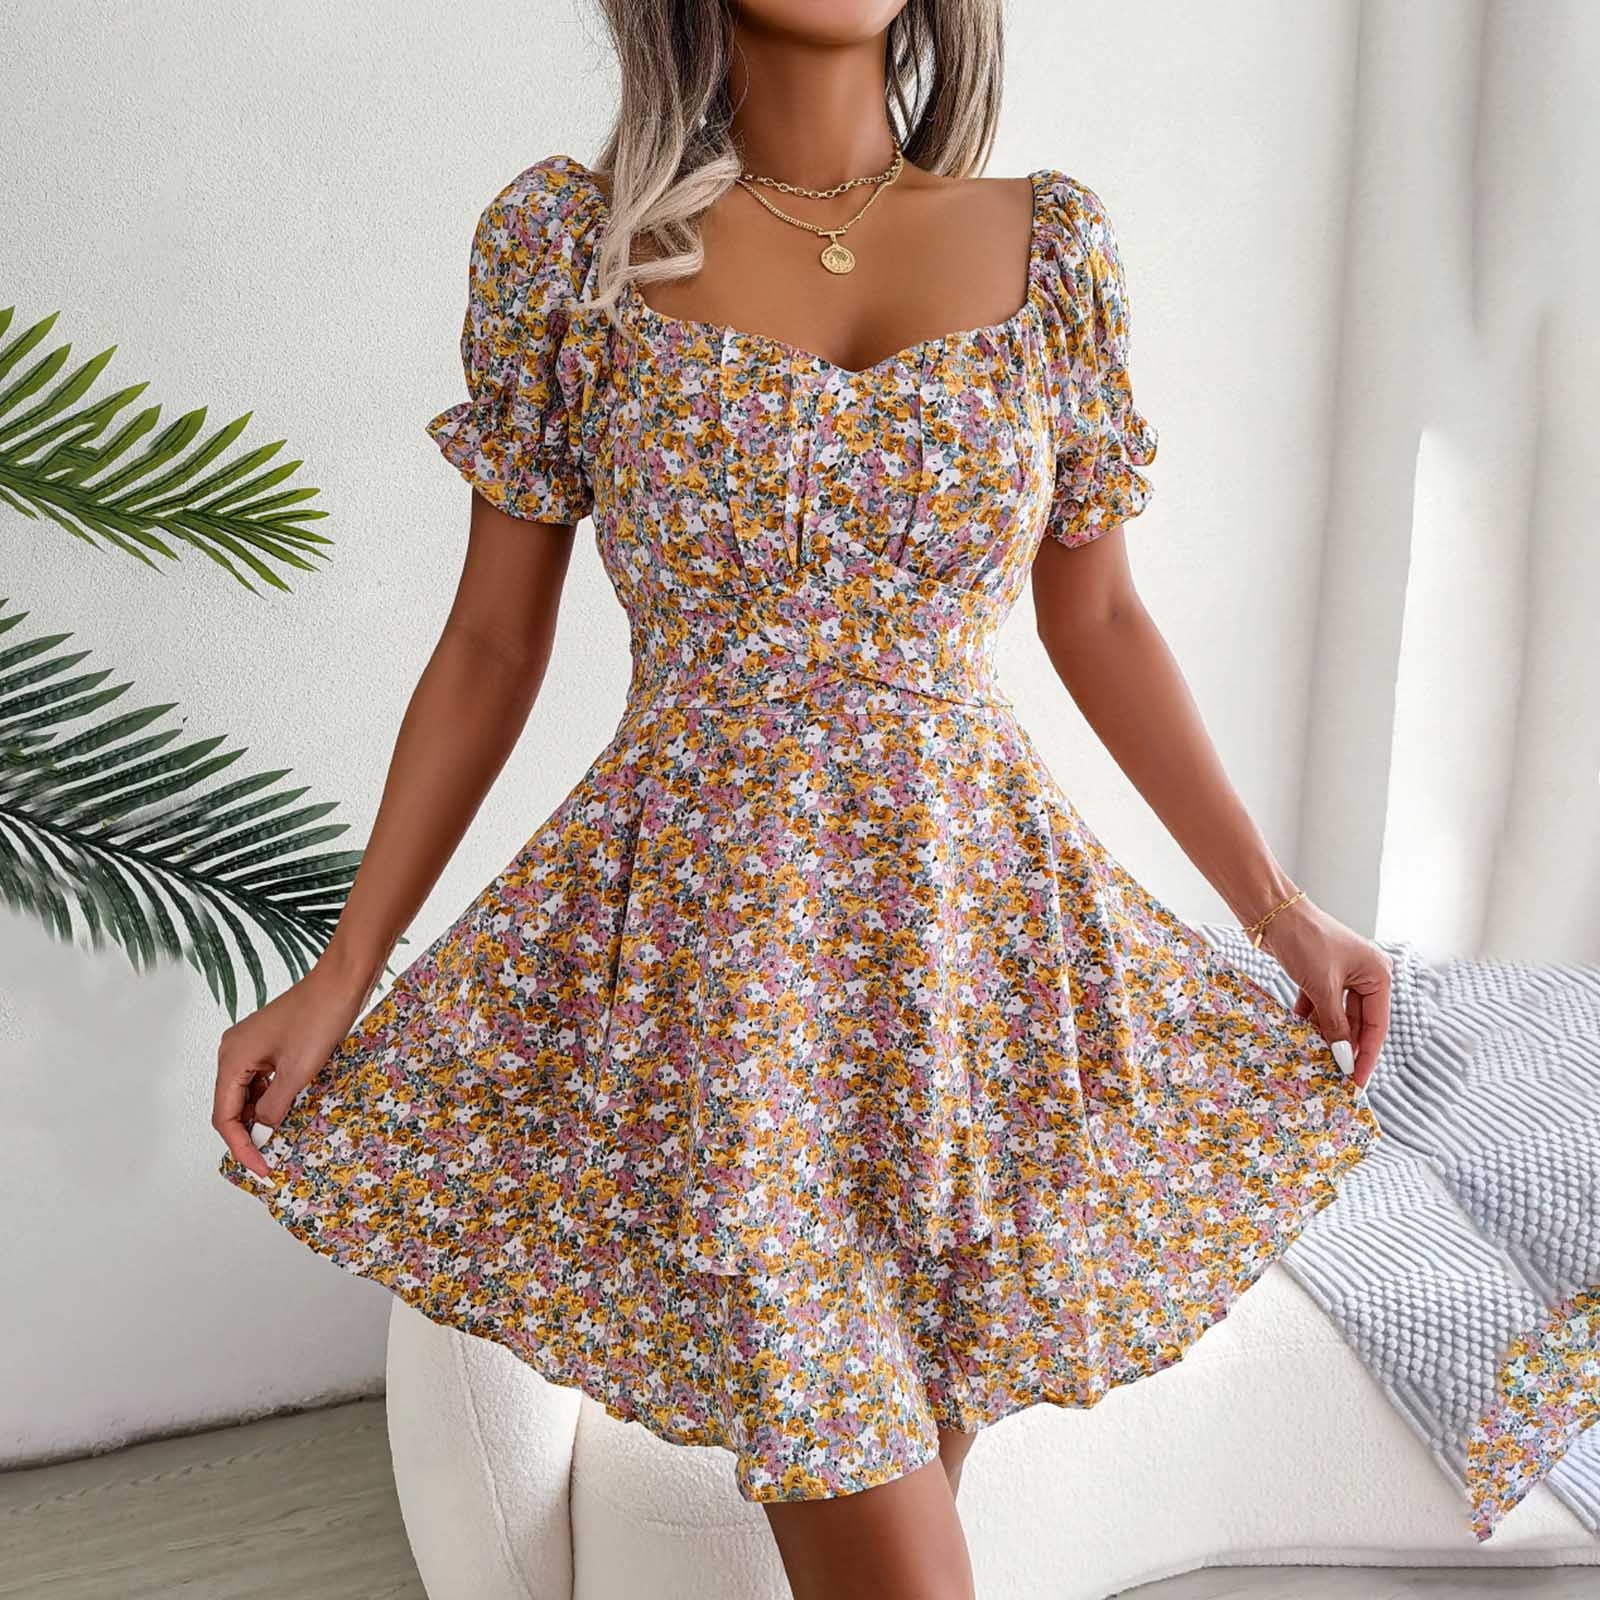 Finelylove Sundresse For Woman Dresses That Hide Belly Fat V-Neck Printed  Short Sleeve Mini Yellow 